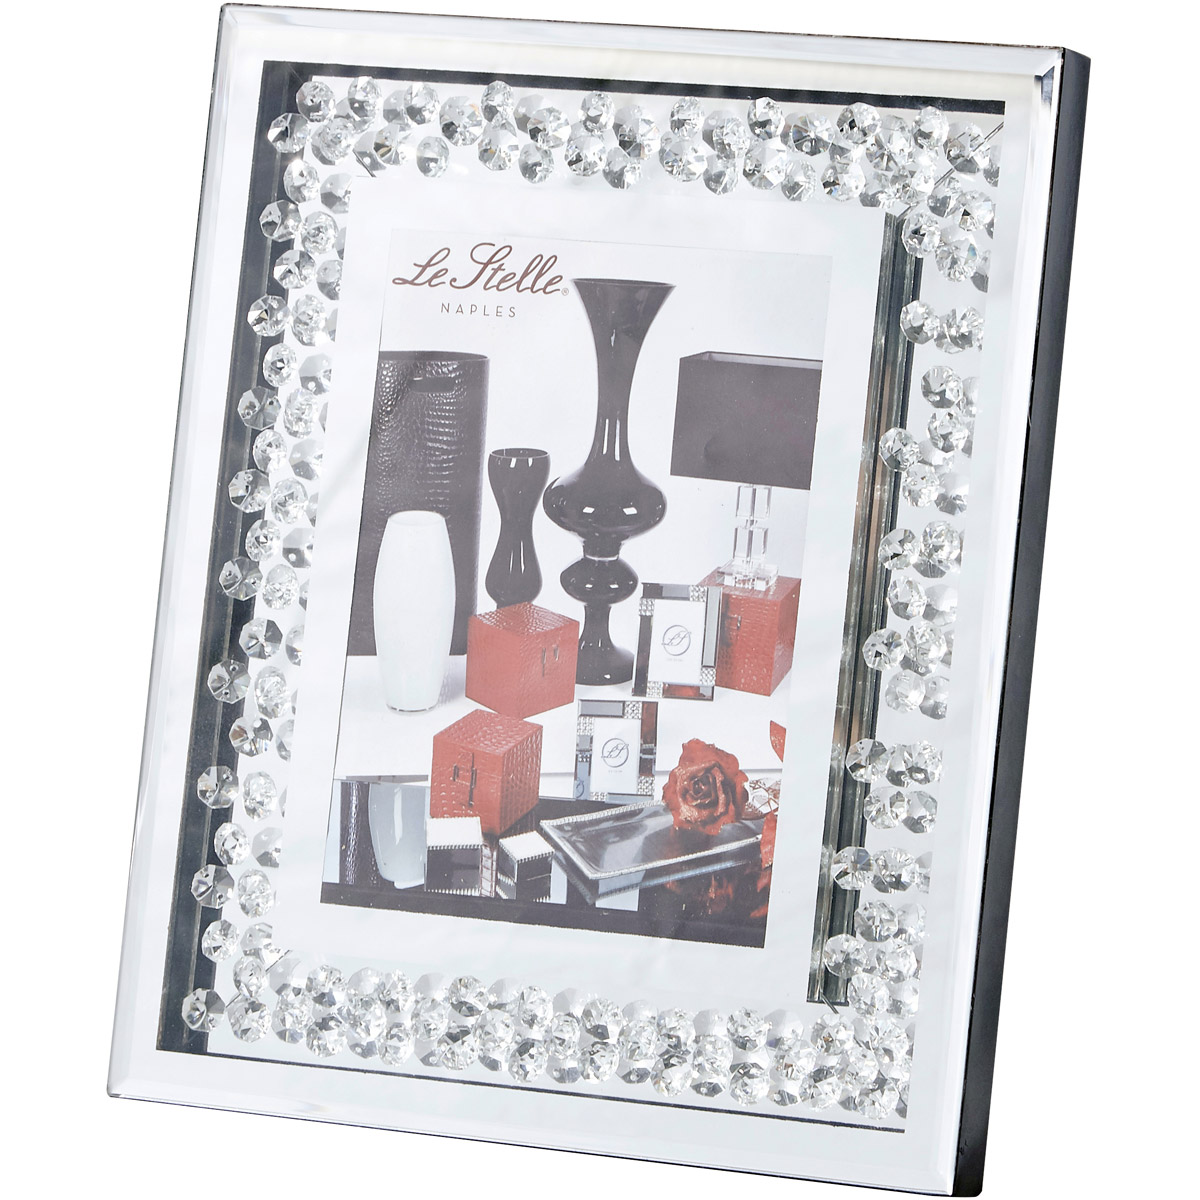 Mr9105 Sparkle 11 In. Contemporary Crystal Photo Frame, Clear